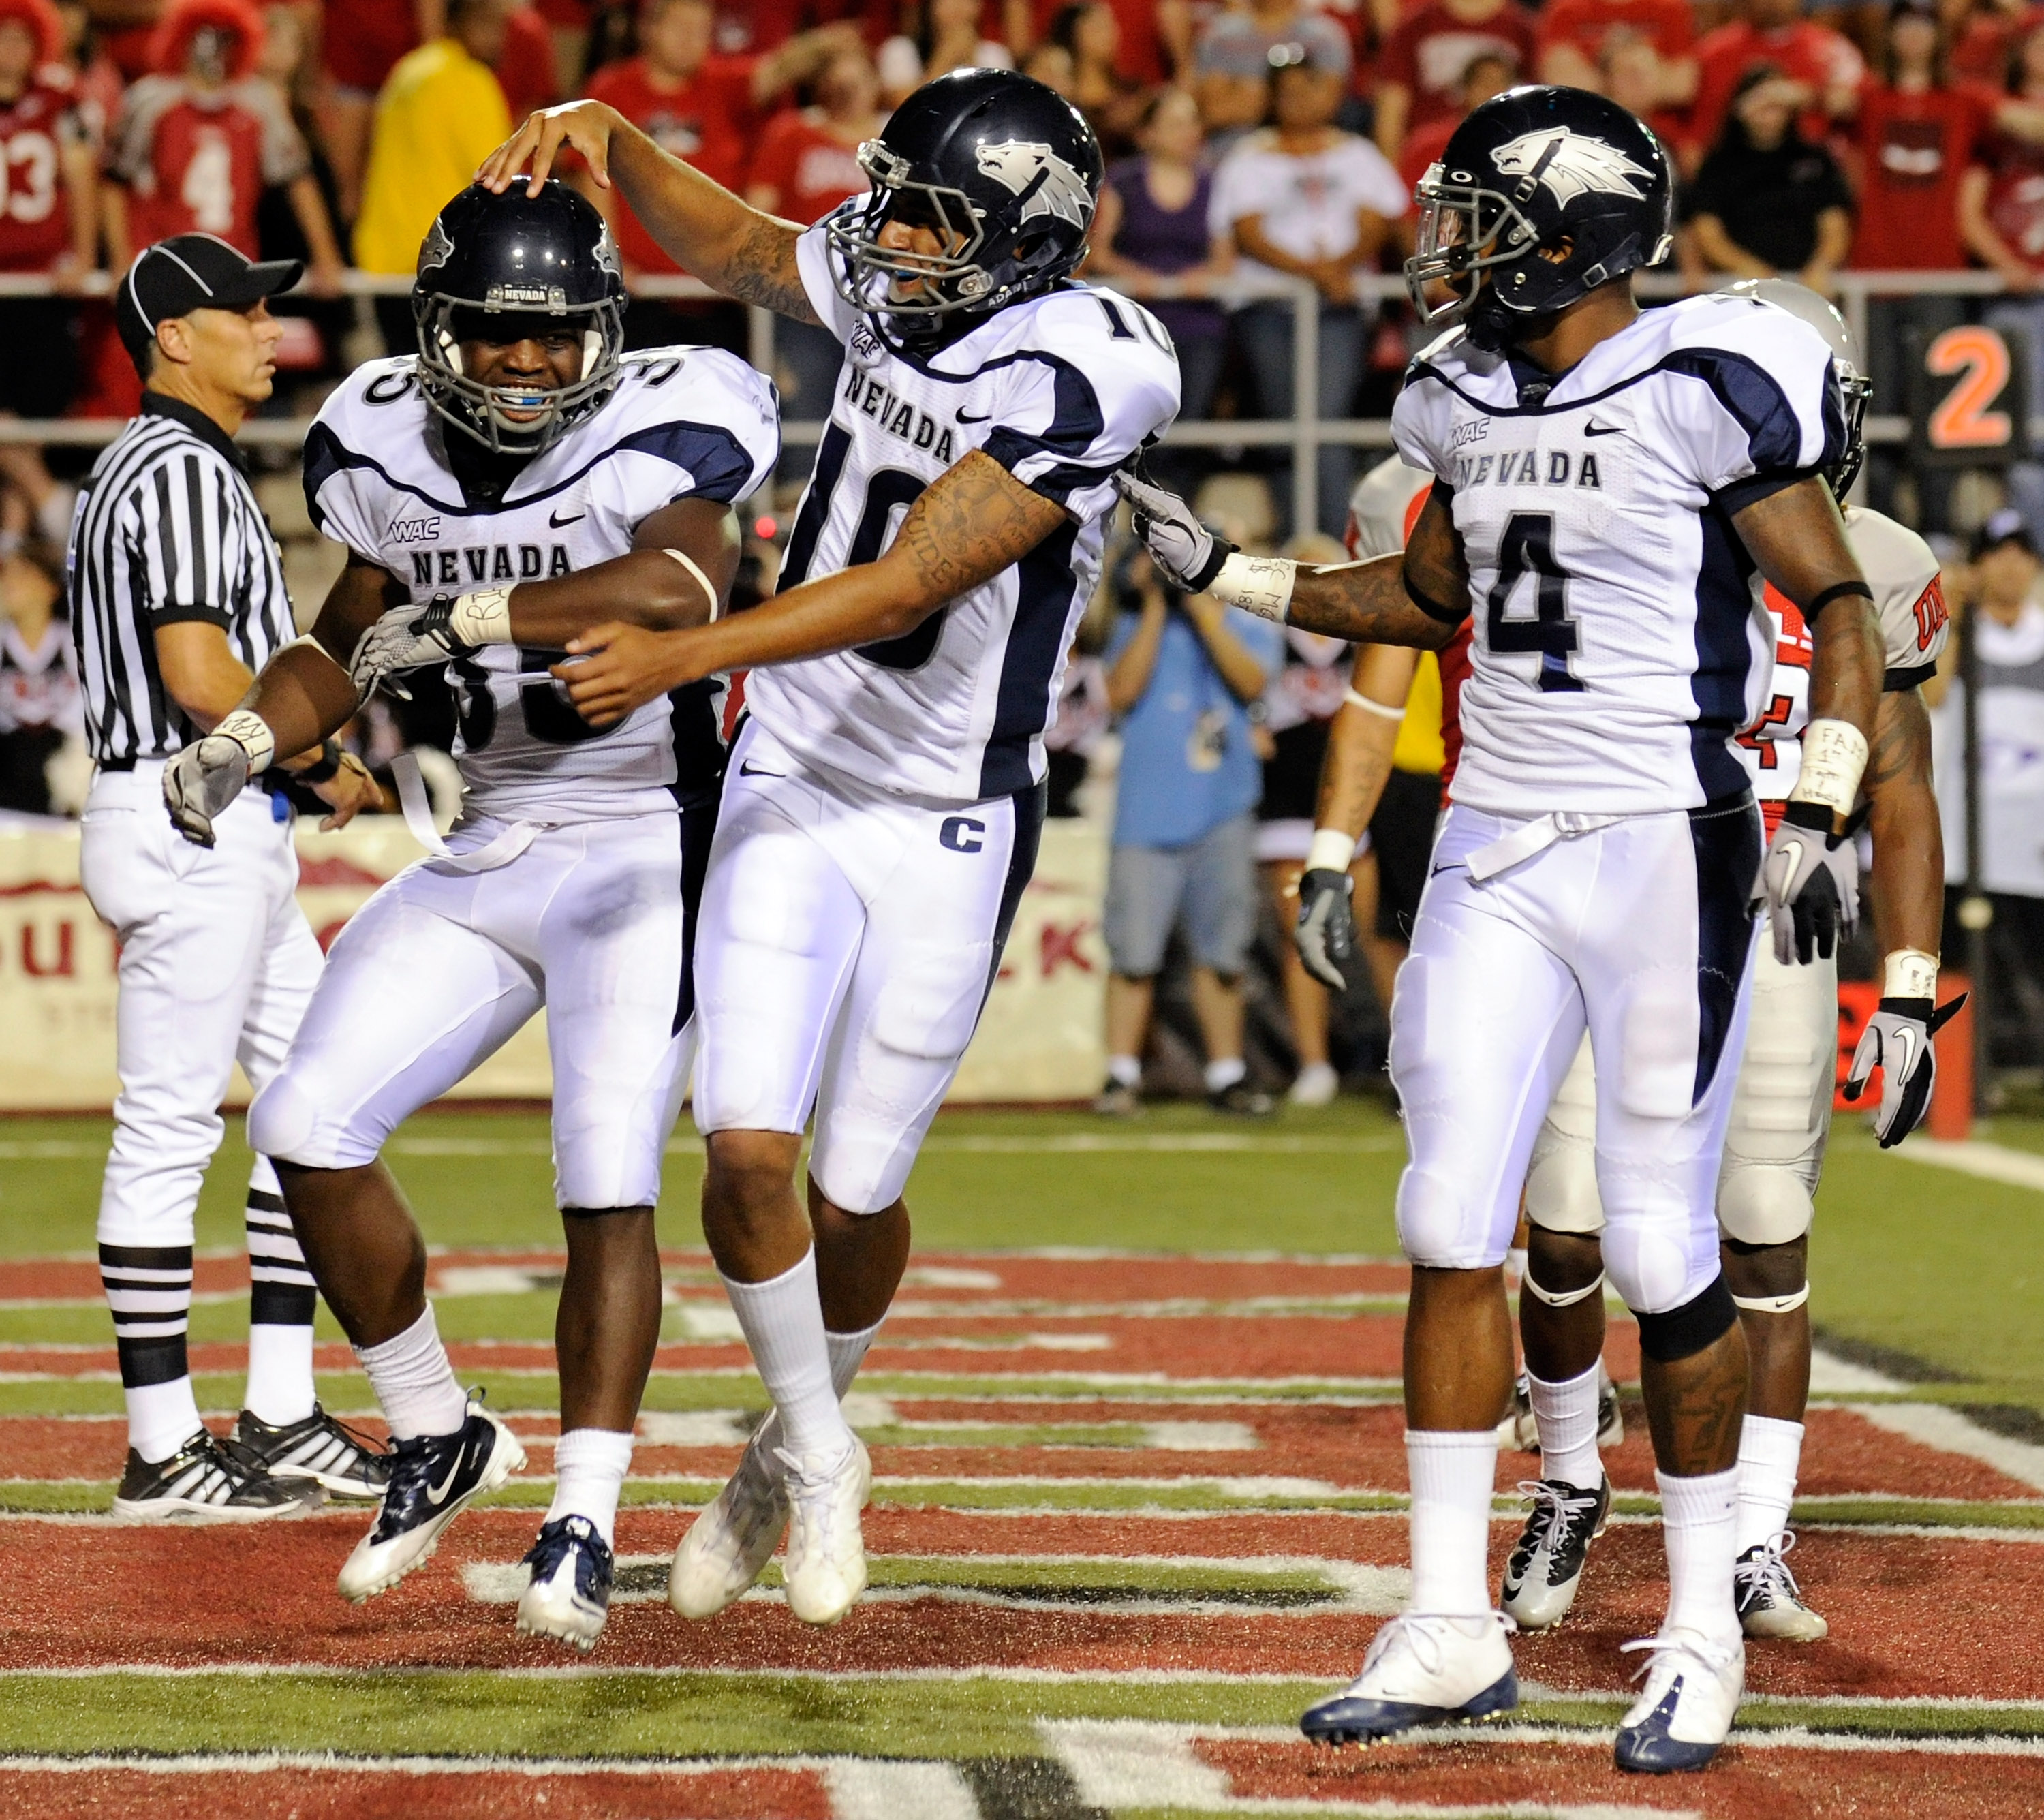 LAS VEGAS - OCTOBER 02:  (L-R) Courtney Randall #35 of the Nevada Reno Wolf Pack is congratulated by quarterback Colin Kaepernick #10 and Brandon Wimberly #4 after Randall scored a touchdown against the UNLV Rebels in the second quarter of their game at S